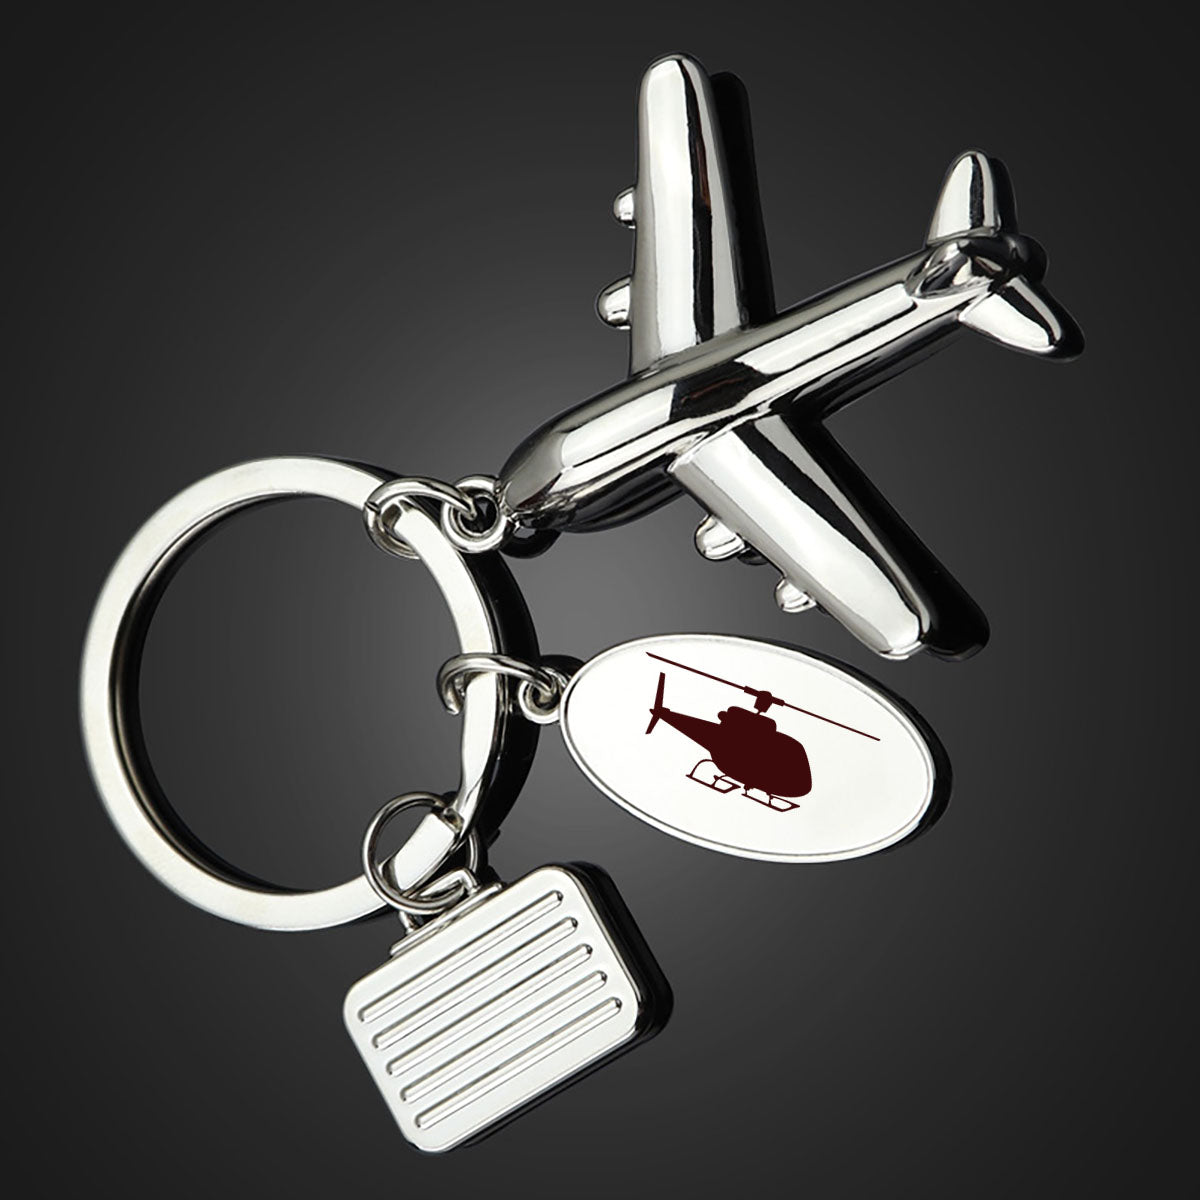 Helicopter Designed Suitcase Airplane Key Chains